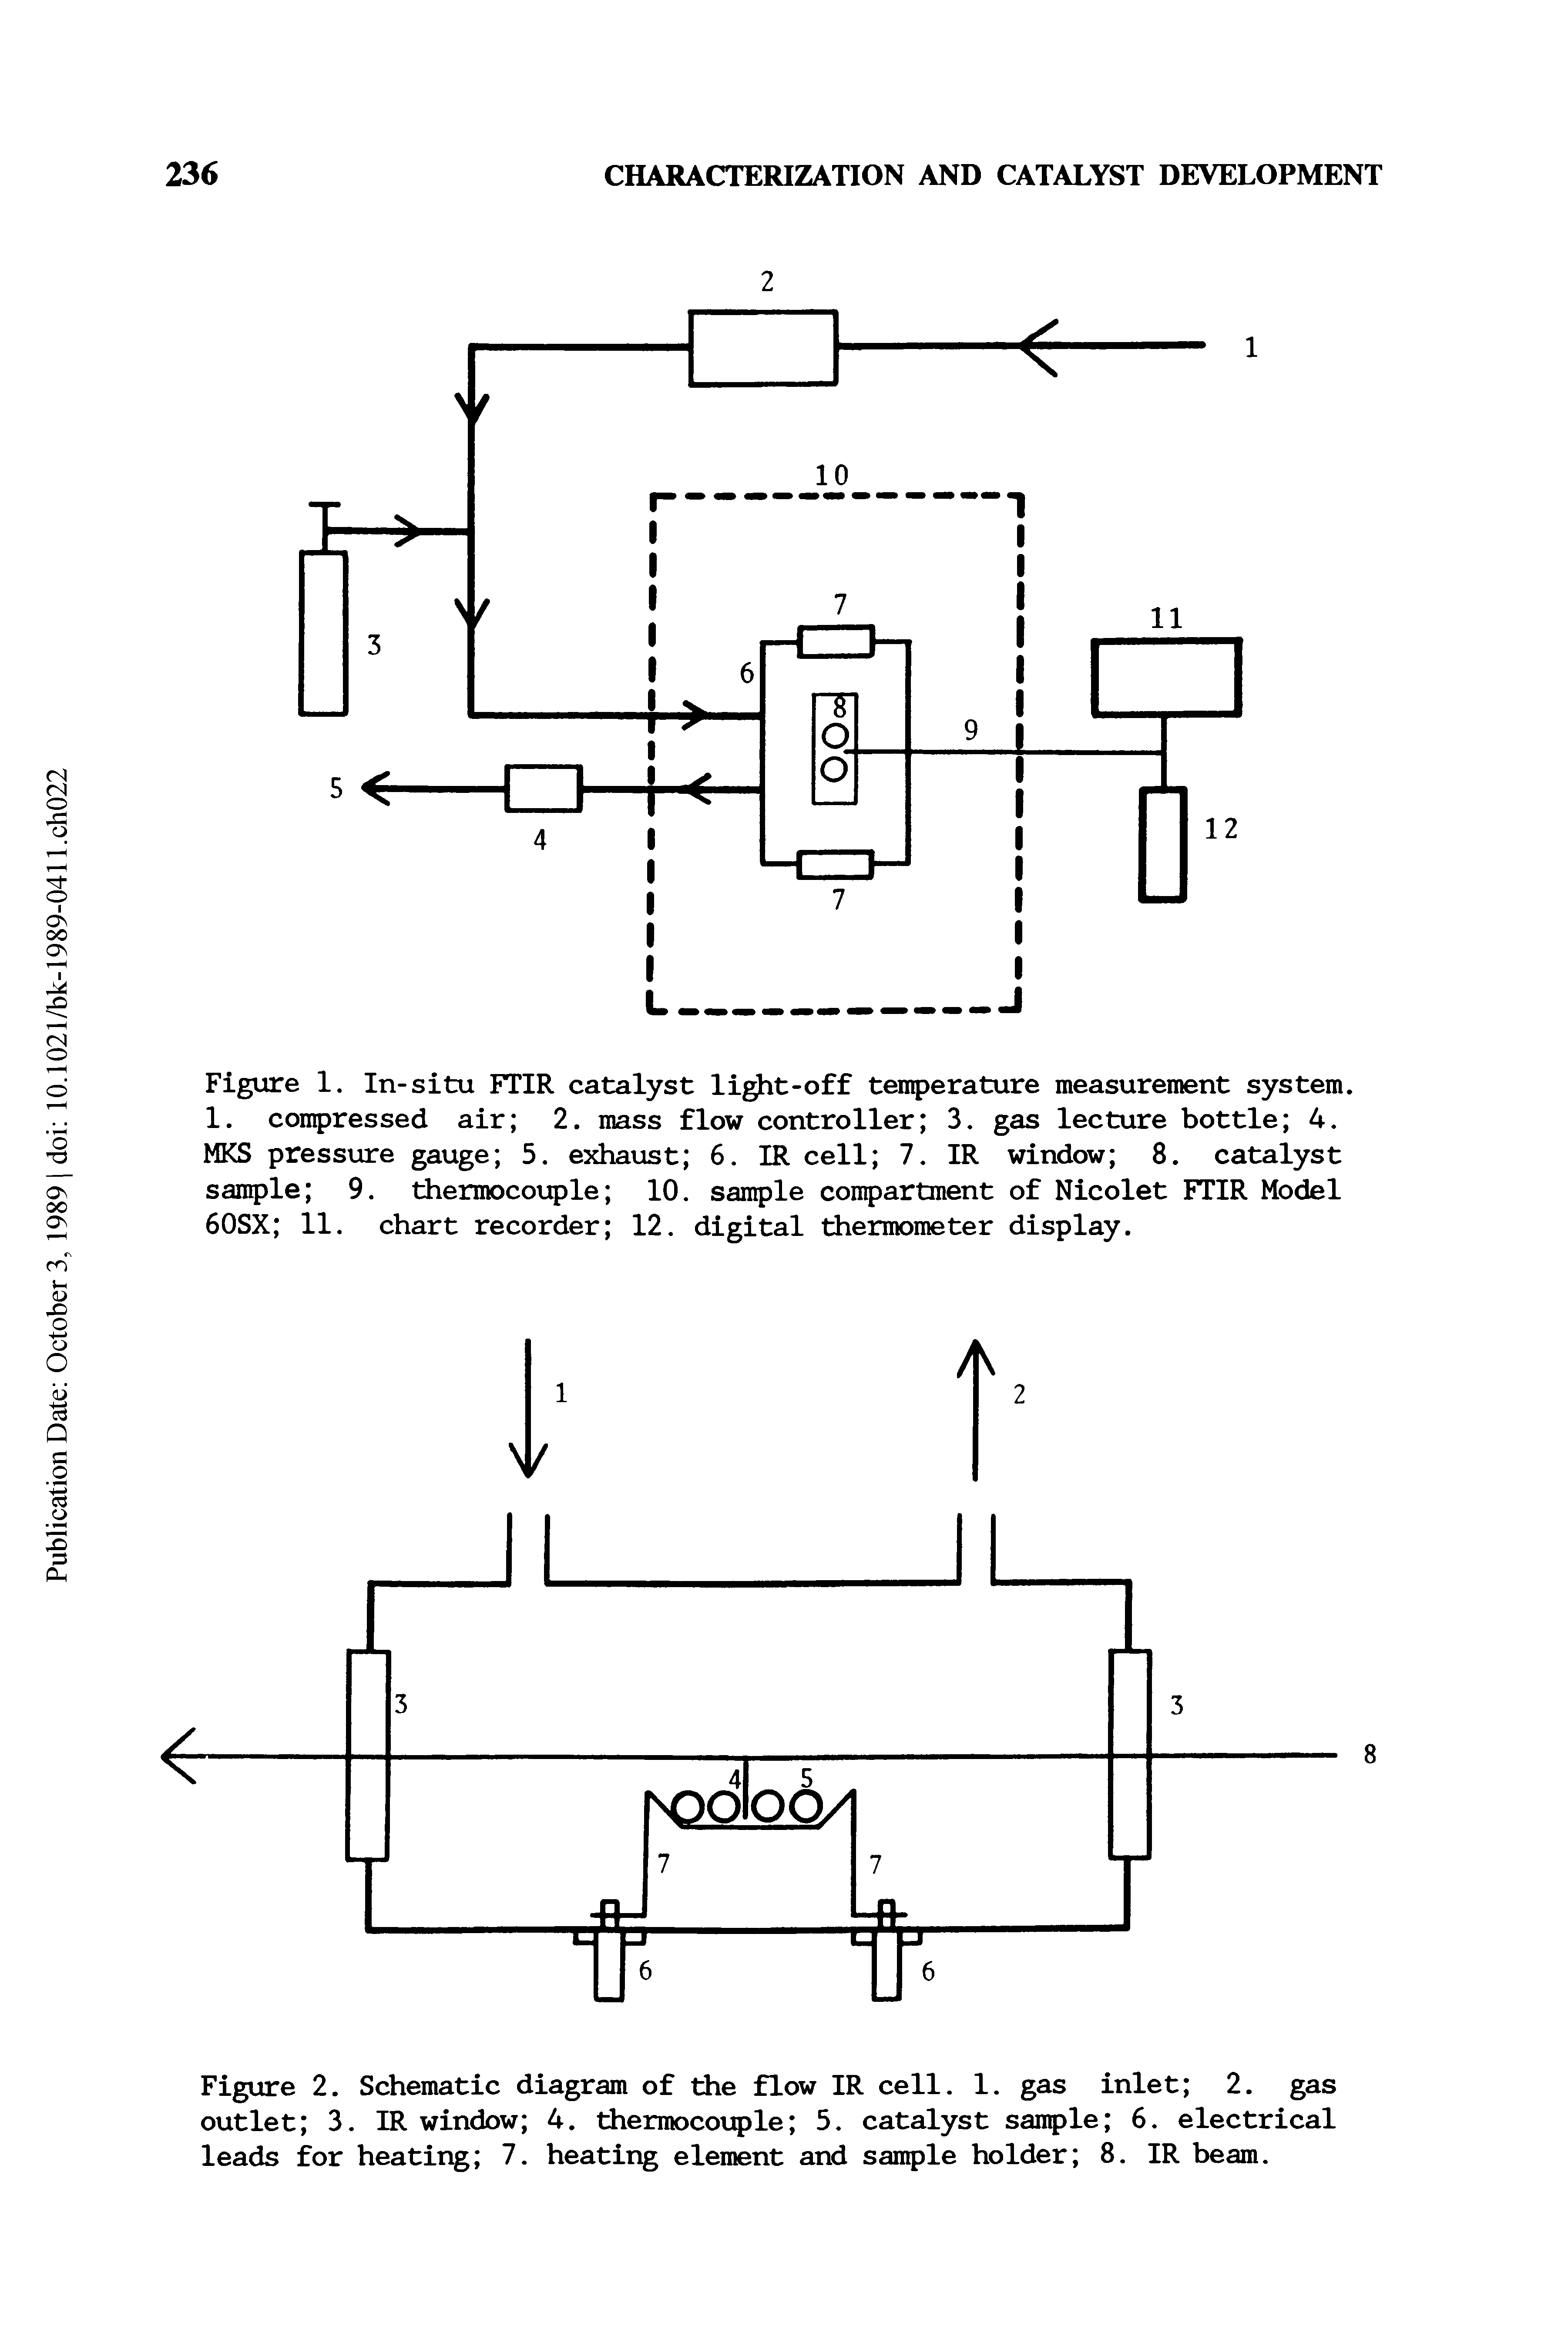 Figure 2. Schematic diagram of the flow IR cell. 1. gas inlet 2. gas outlet 3. IR window 4. thermocouple 5. catalyst sample 6. electrical leads for heating 7. heating element and sample holder 8. IR beam.